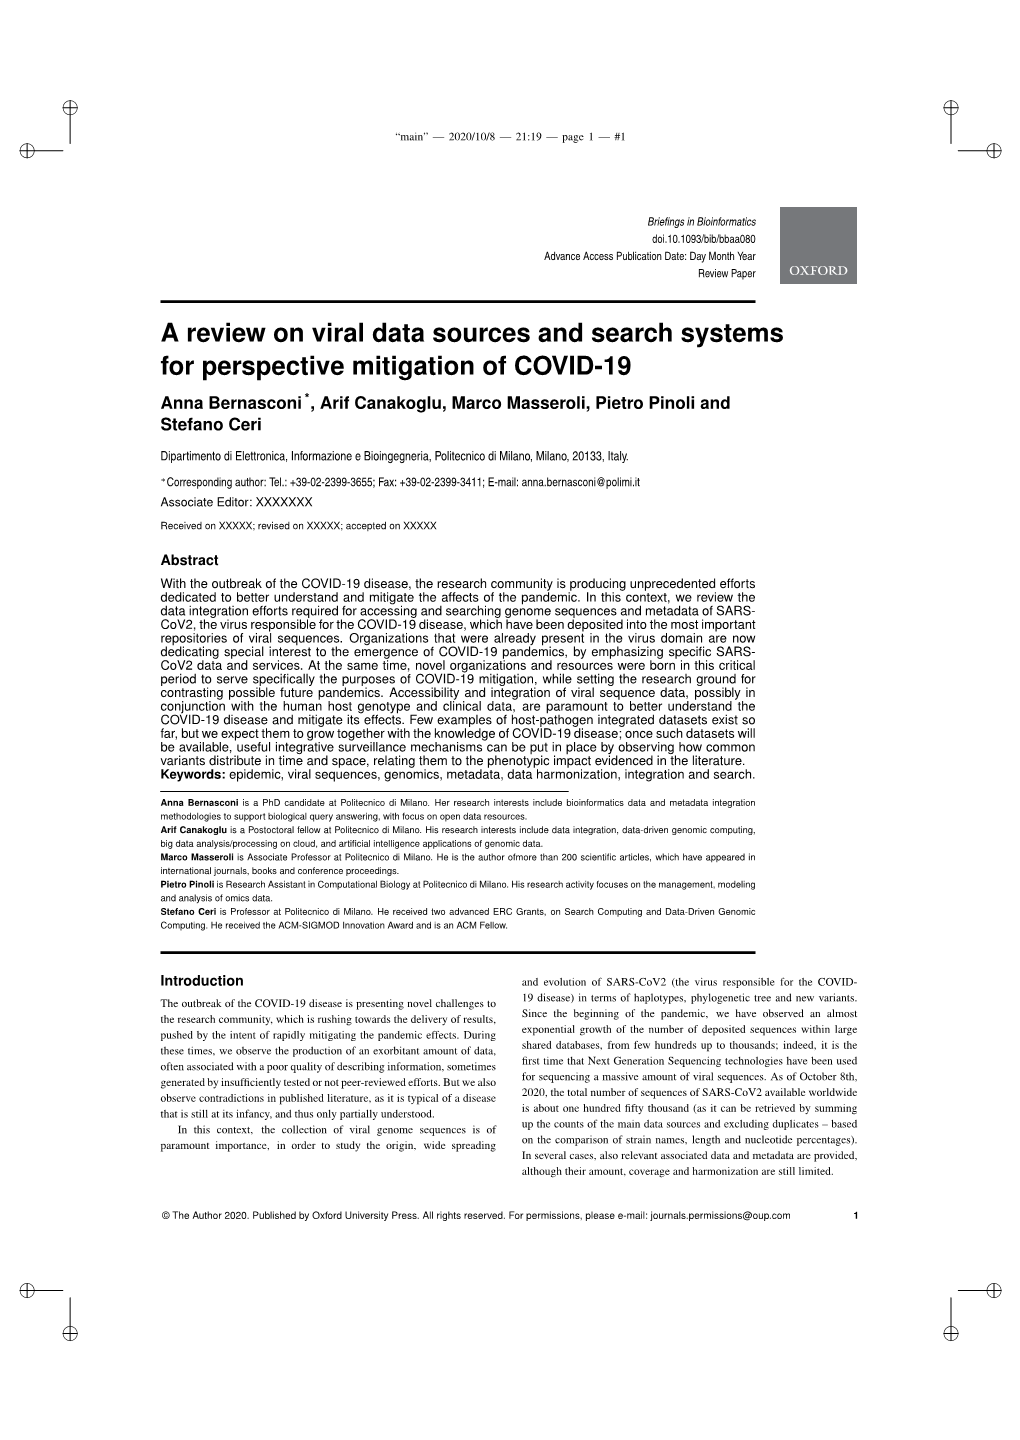 A Review on Viral Data Sources and Search Systems for Perspective Mitigation of COVID-19